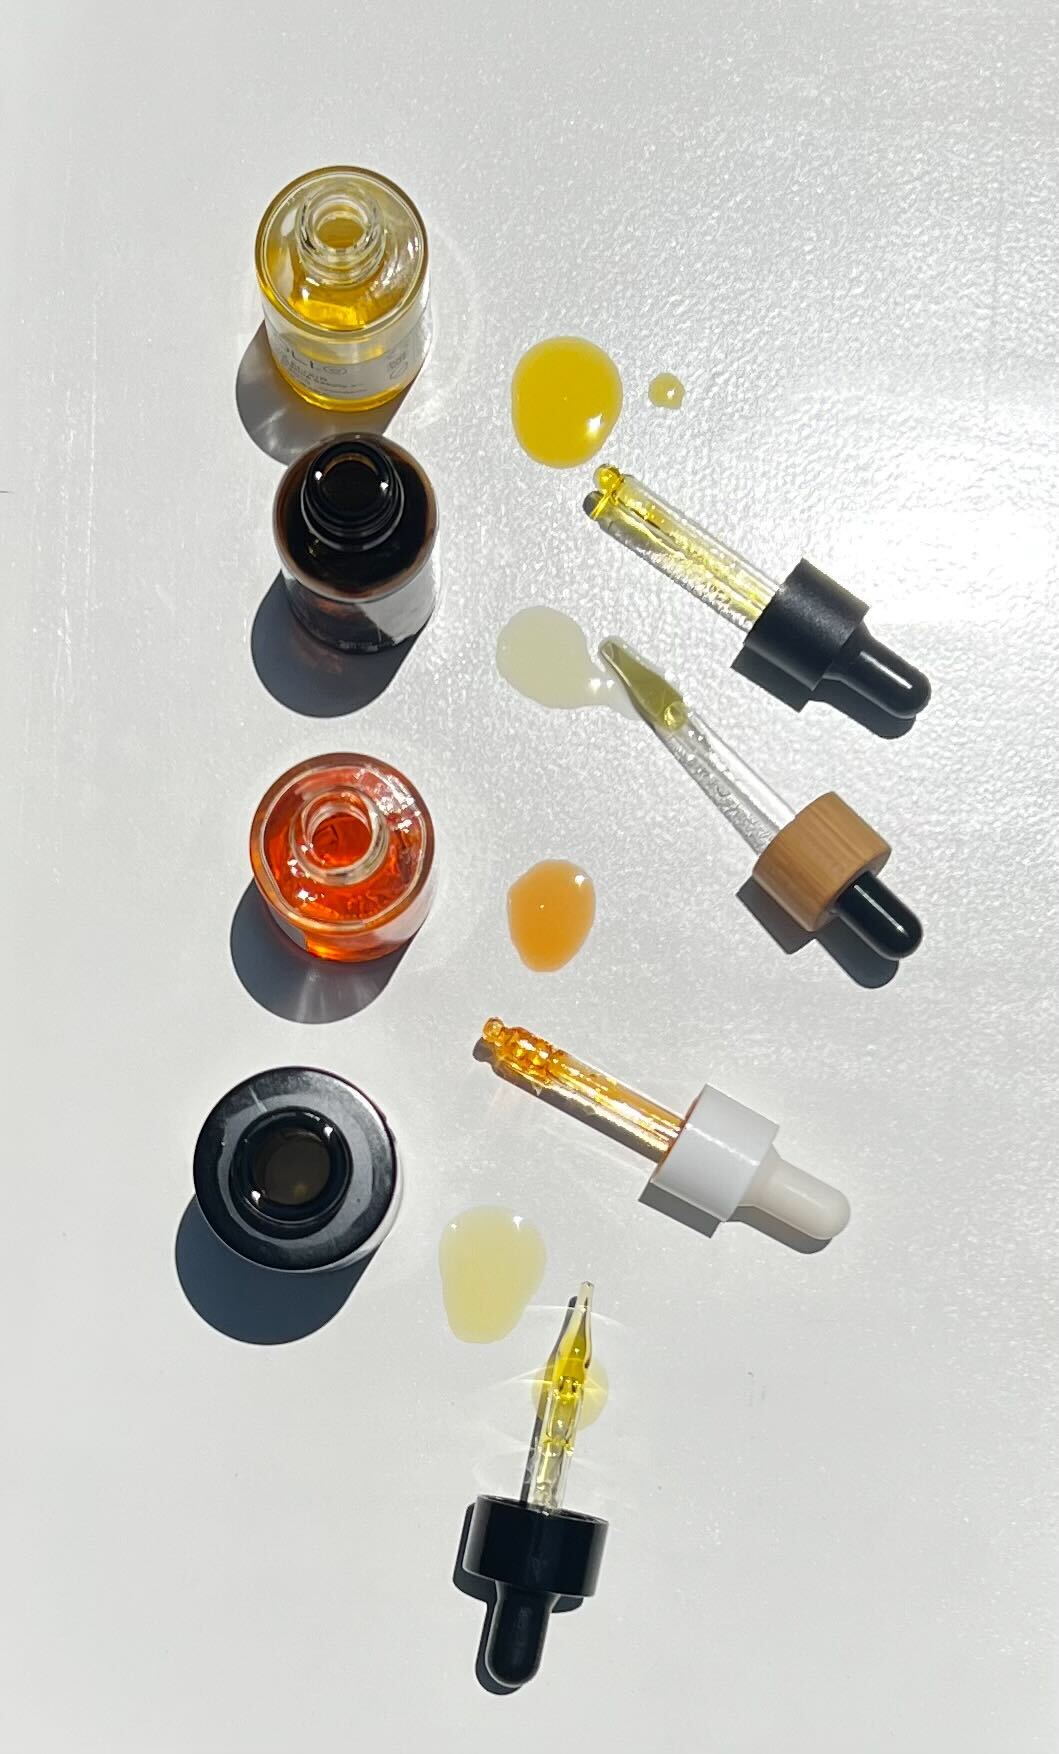 A collection of plum oils with their droppers.